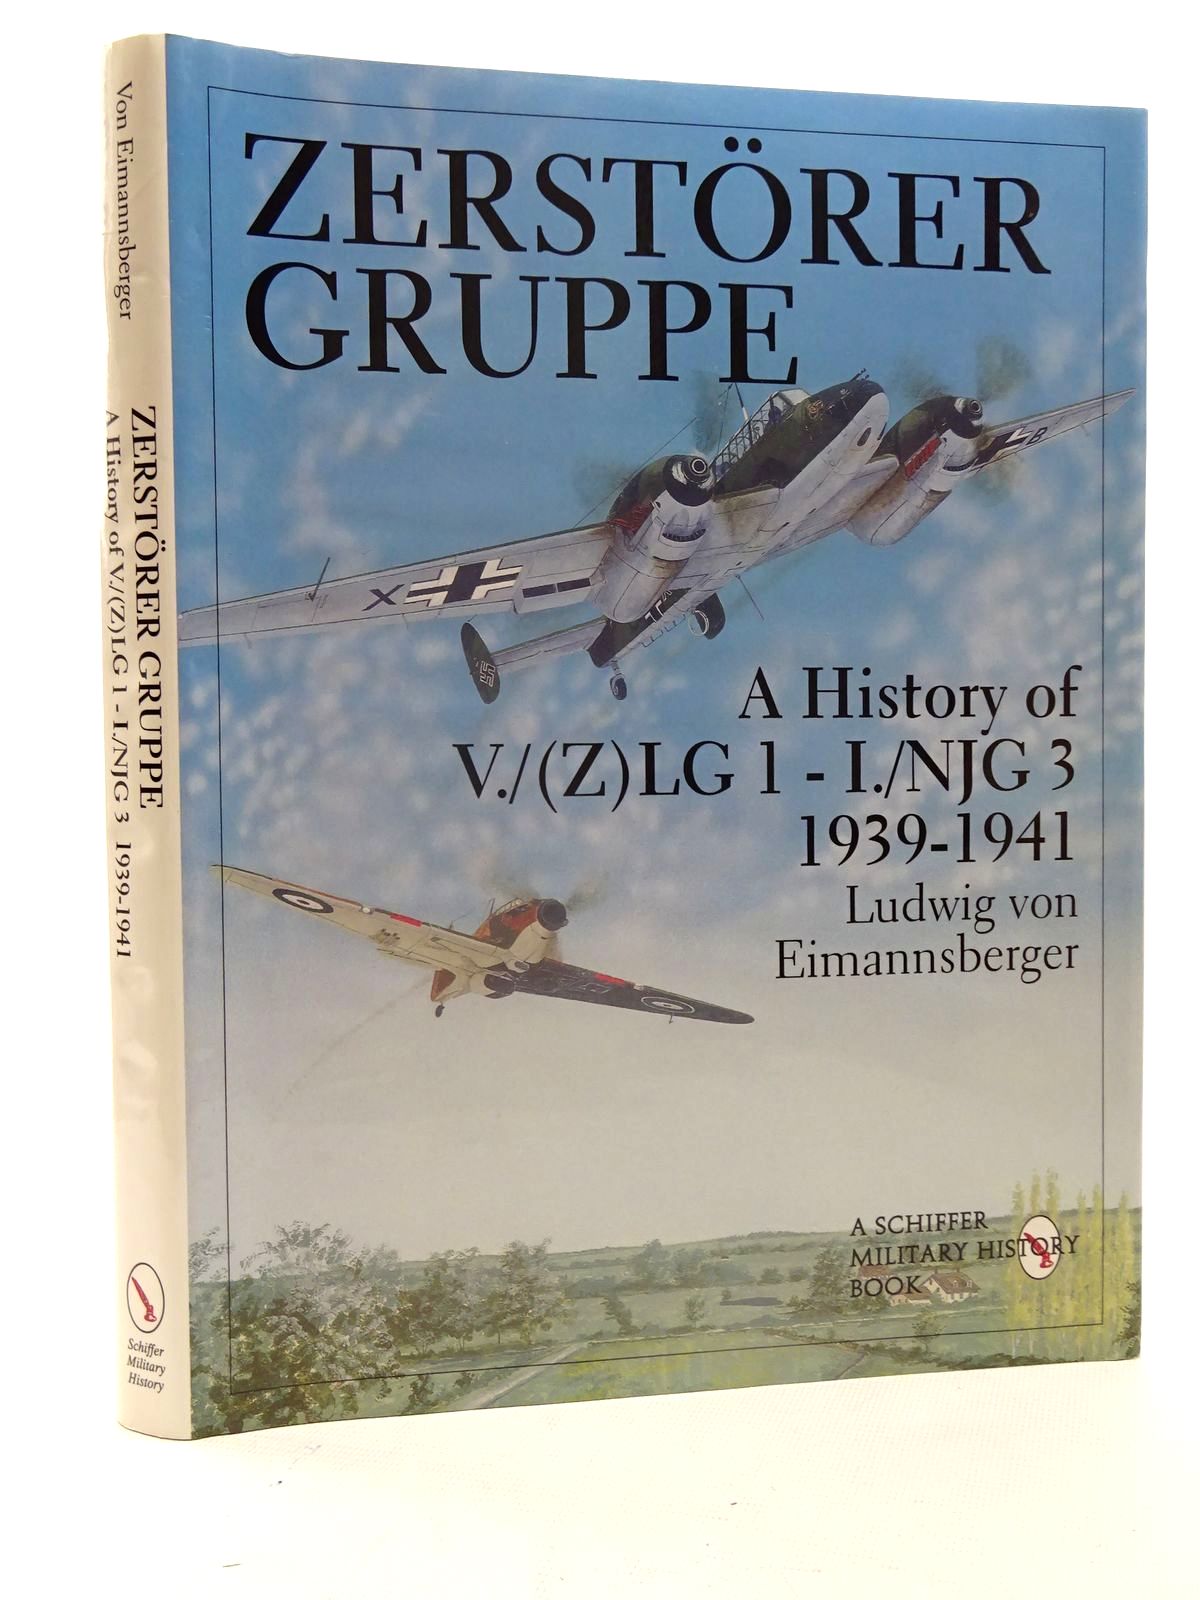 Photo of ZERSTORER GRUPPE A HISTORY OF V./(Z)LG 1 - I./NJG 3 1939-1941 written by Eimannsberger, Ludwig V. published by Schiffer Military History (STOCK CODE: 2125691)  for sale by Stella & Rose's Books